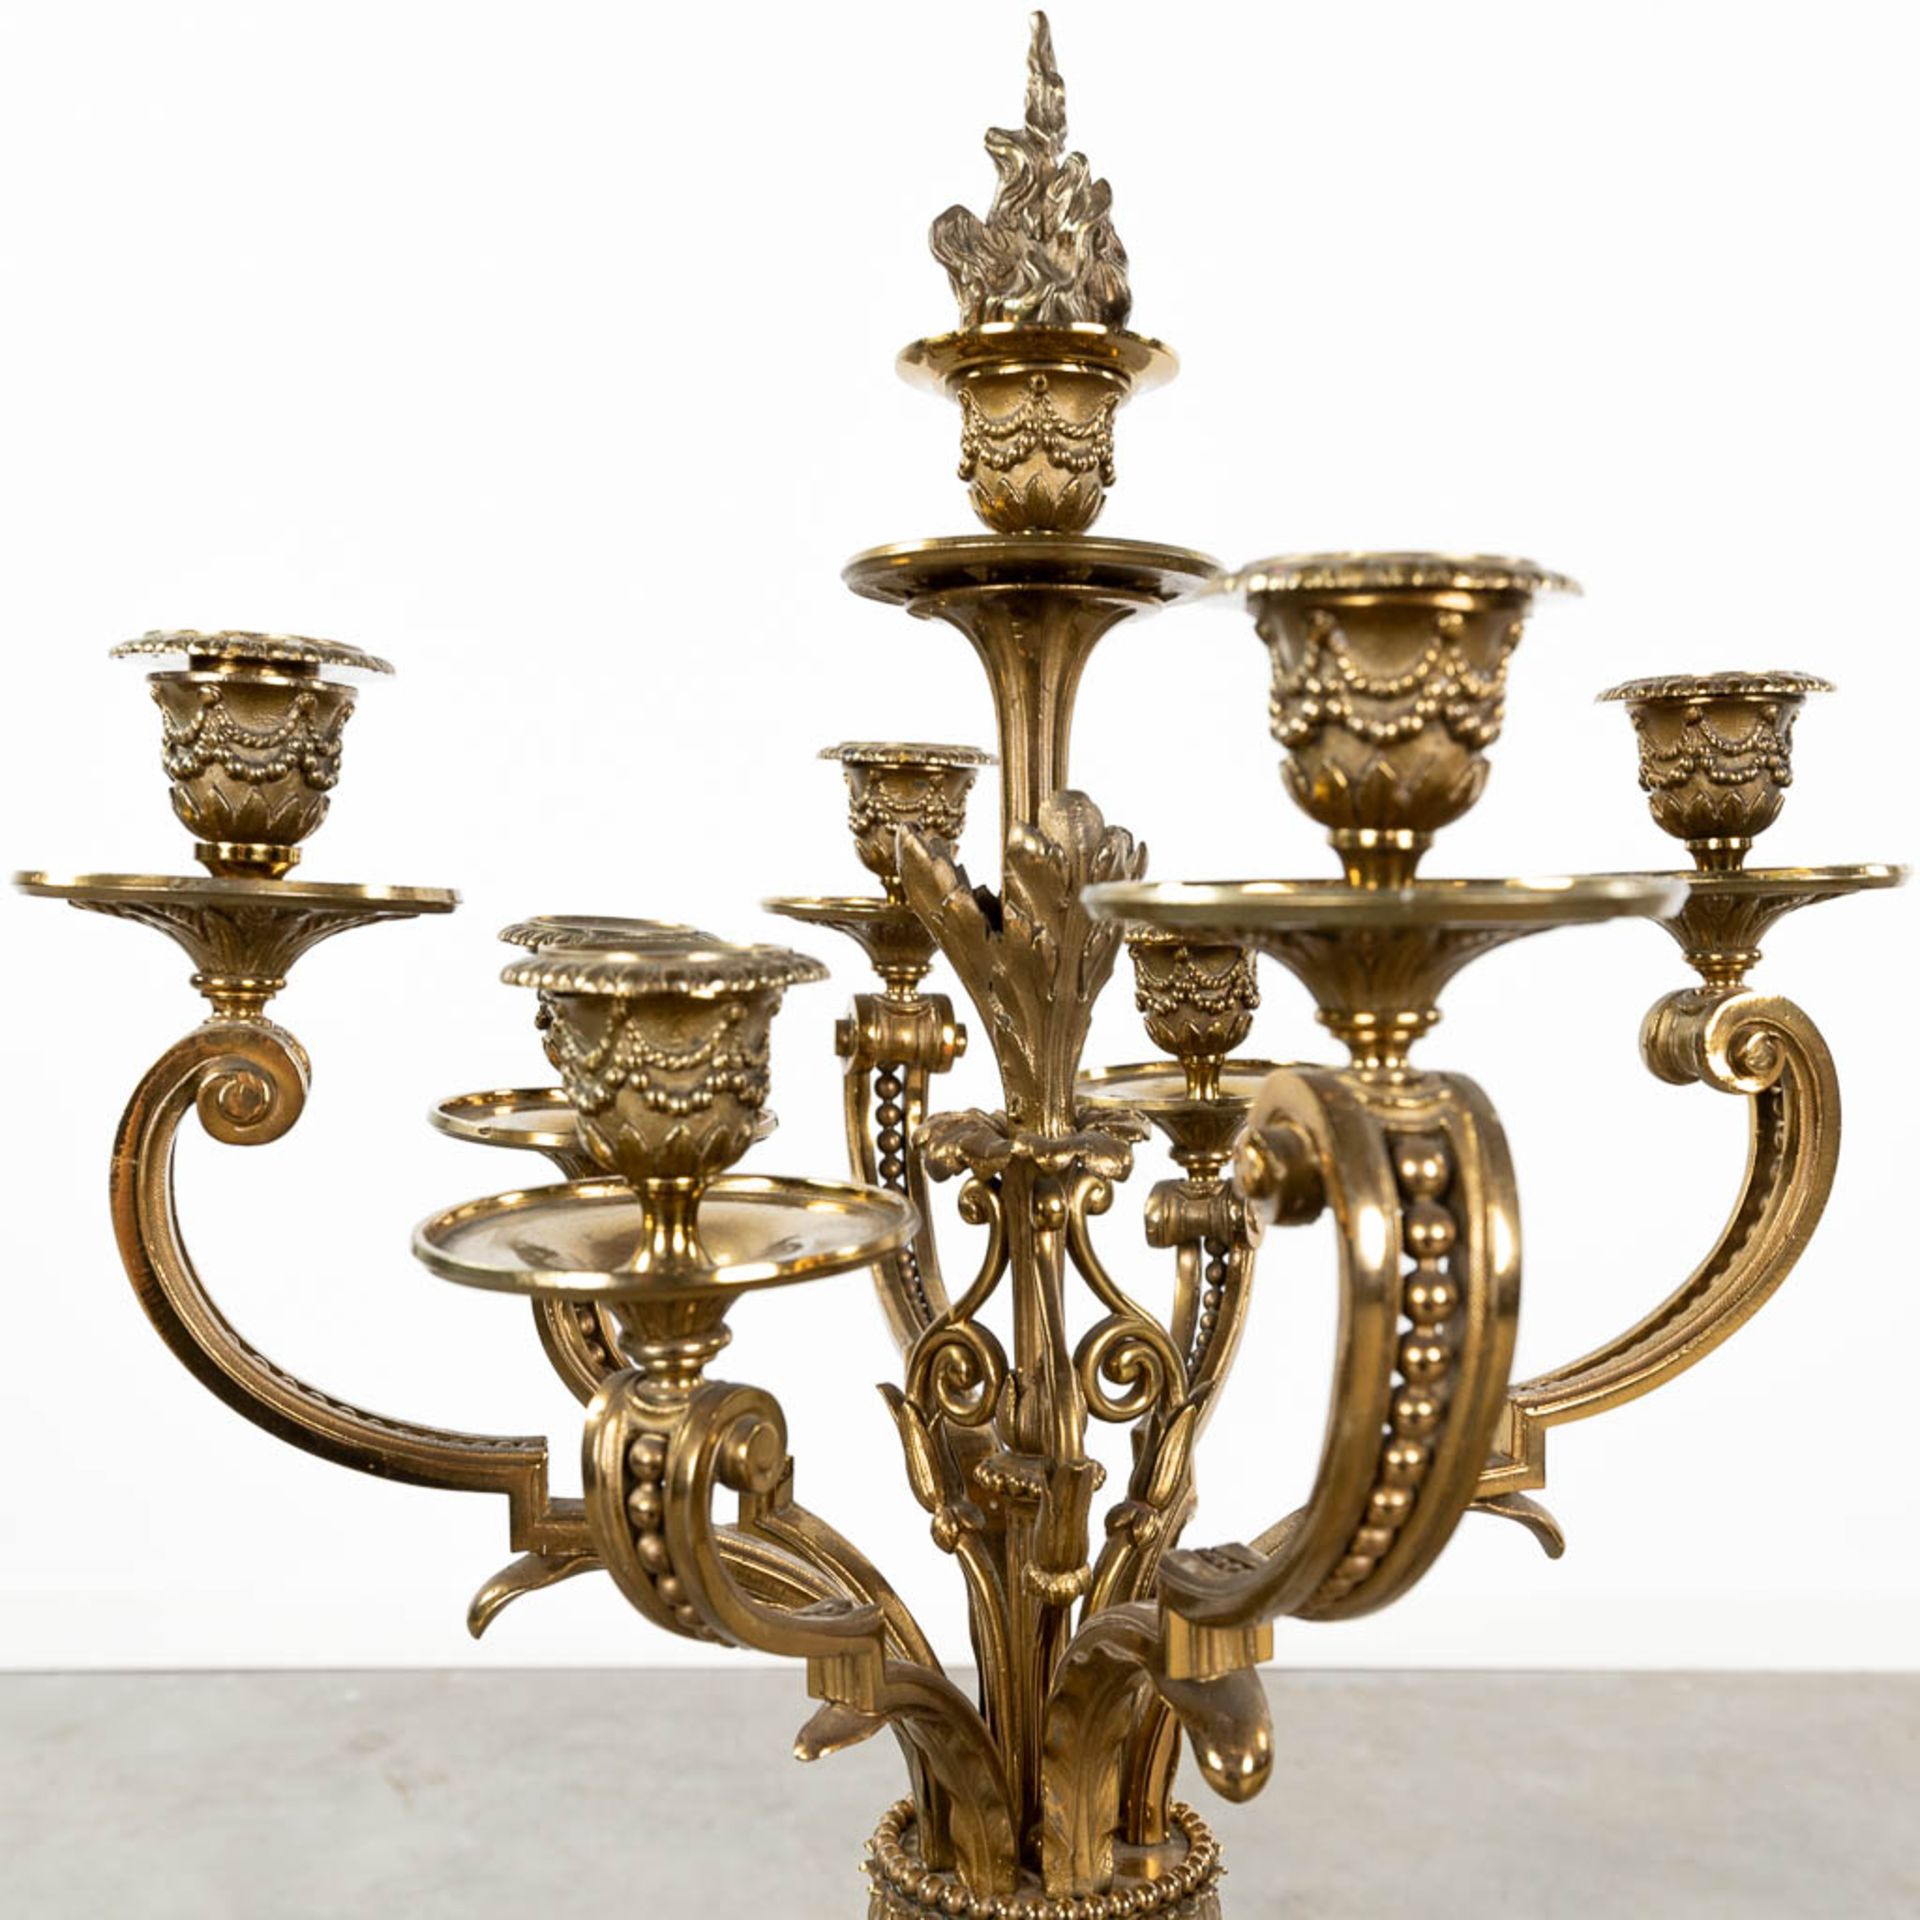 A pair of large neoclassical candelabra made of polished bronze. (L:30 x W:30 x H:90 x D:42,5 cm) - Image 8 of 12